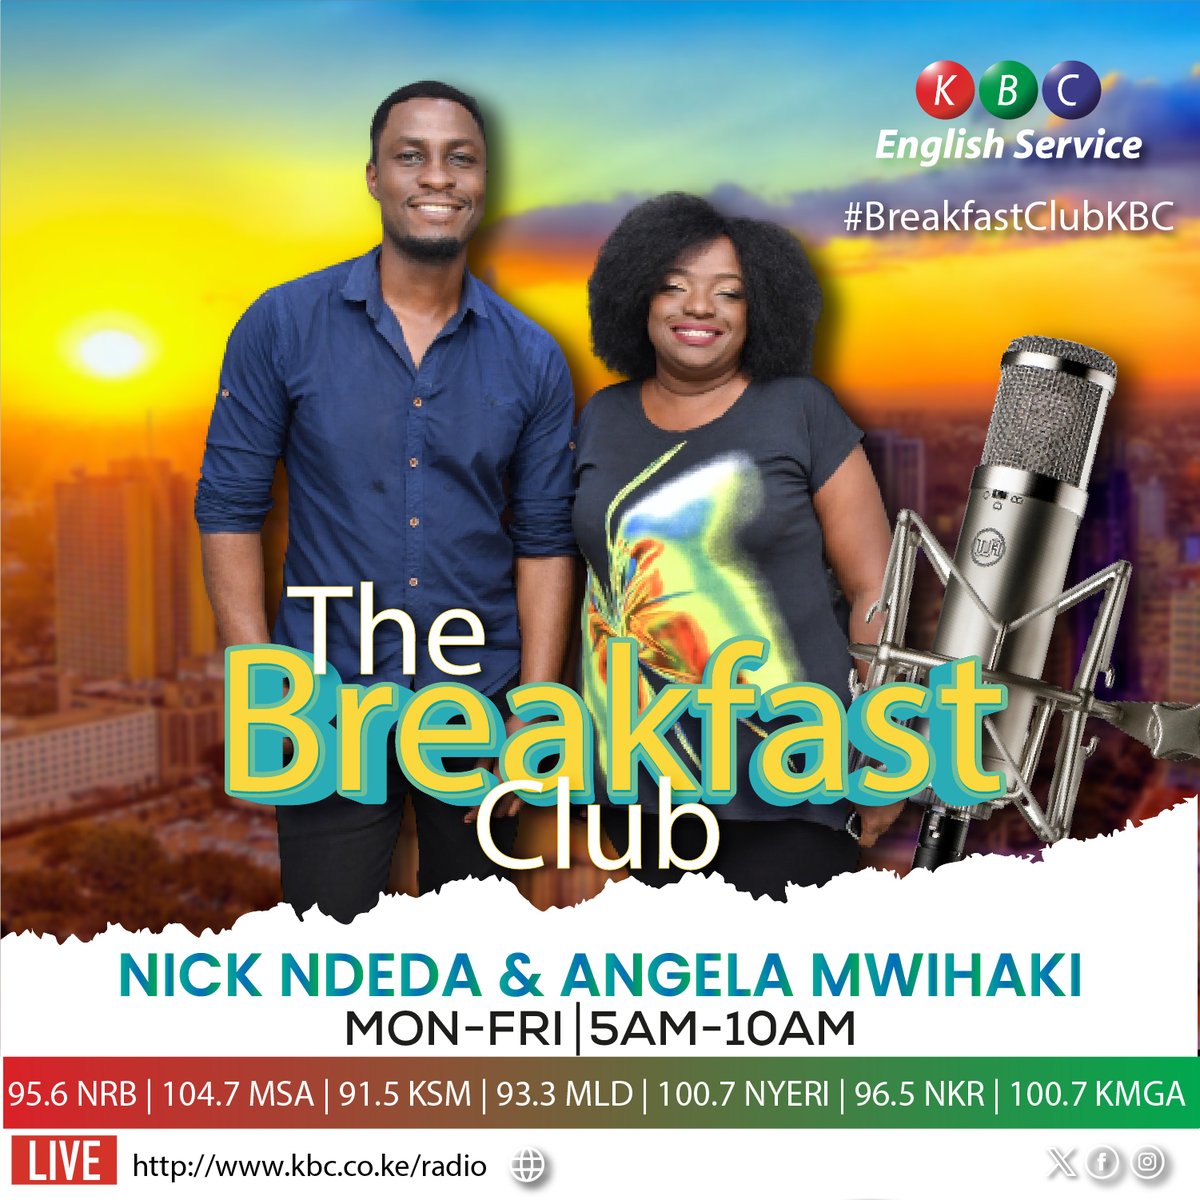 Officially, it's Friday! 🥳🤩 The weekend begins right here. Come have some Breakfast with Nick Ndeda & Angela Mwihaki from 0500HRS to 1000HRS. Where are you at? Listen live: kbc.co.ke/radio/ ^PMN #BreakfastClubKBC @NickNdeda | @angelamwihaki